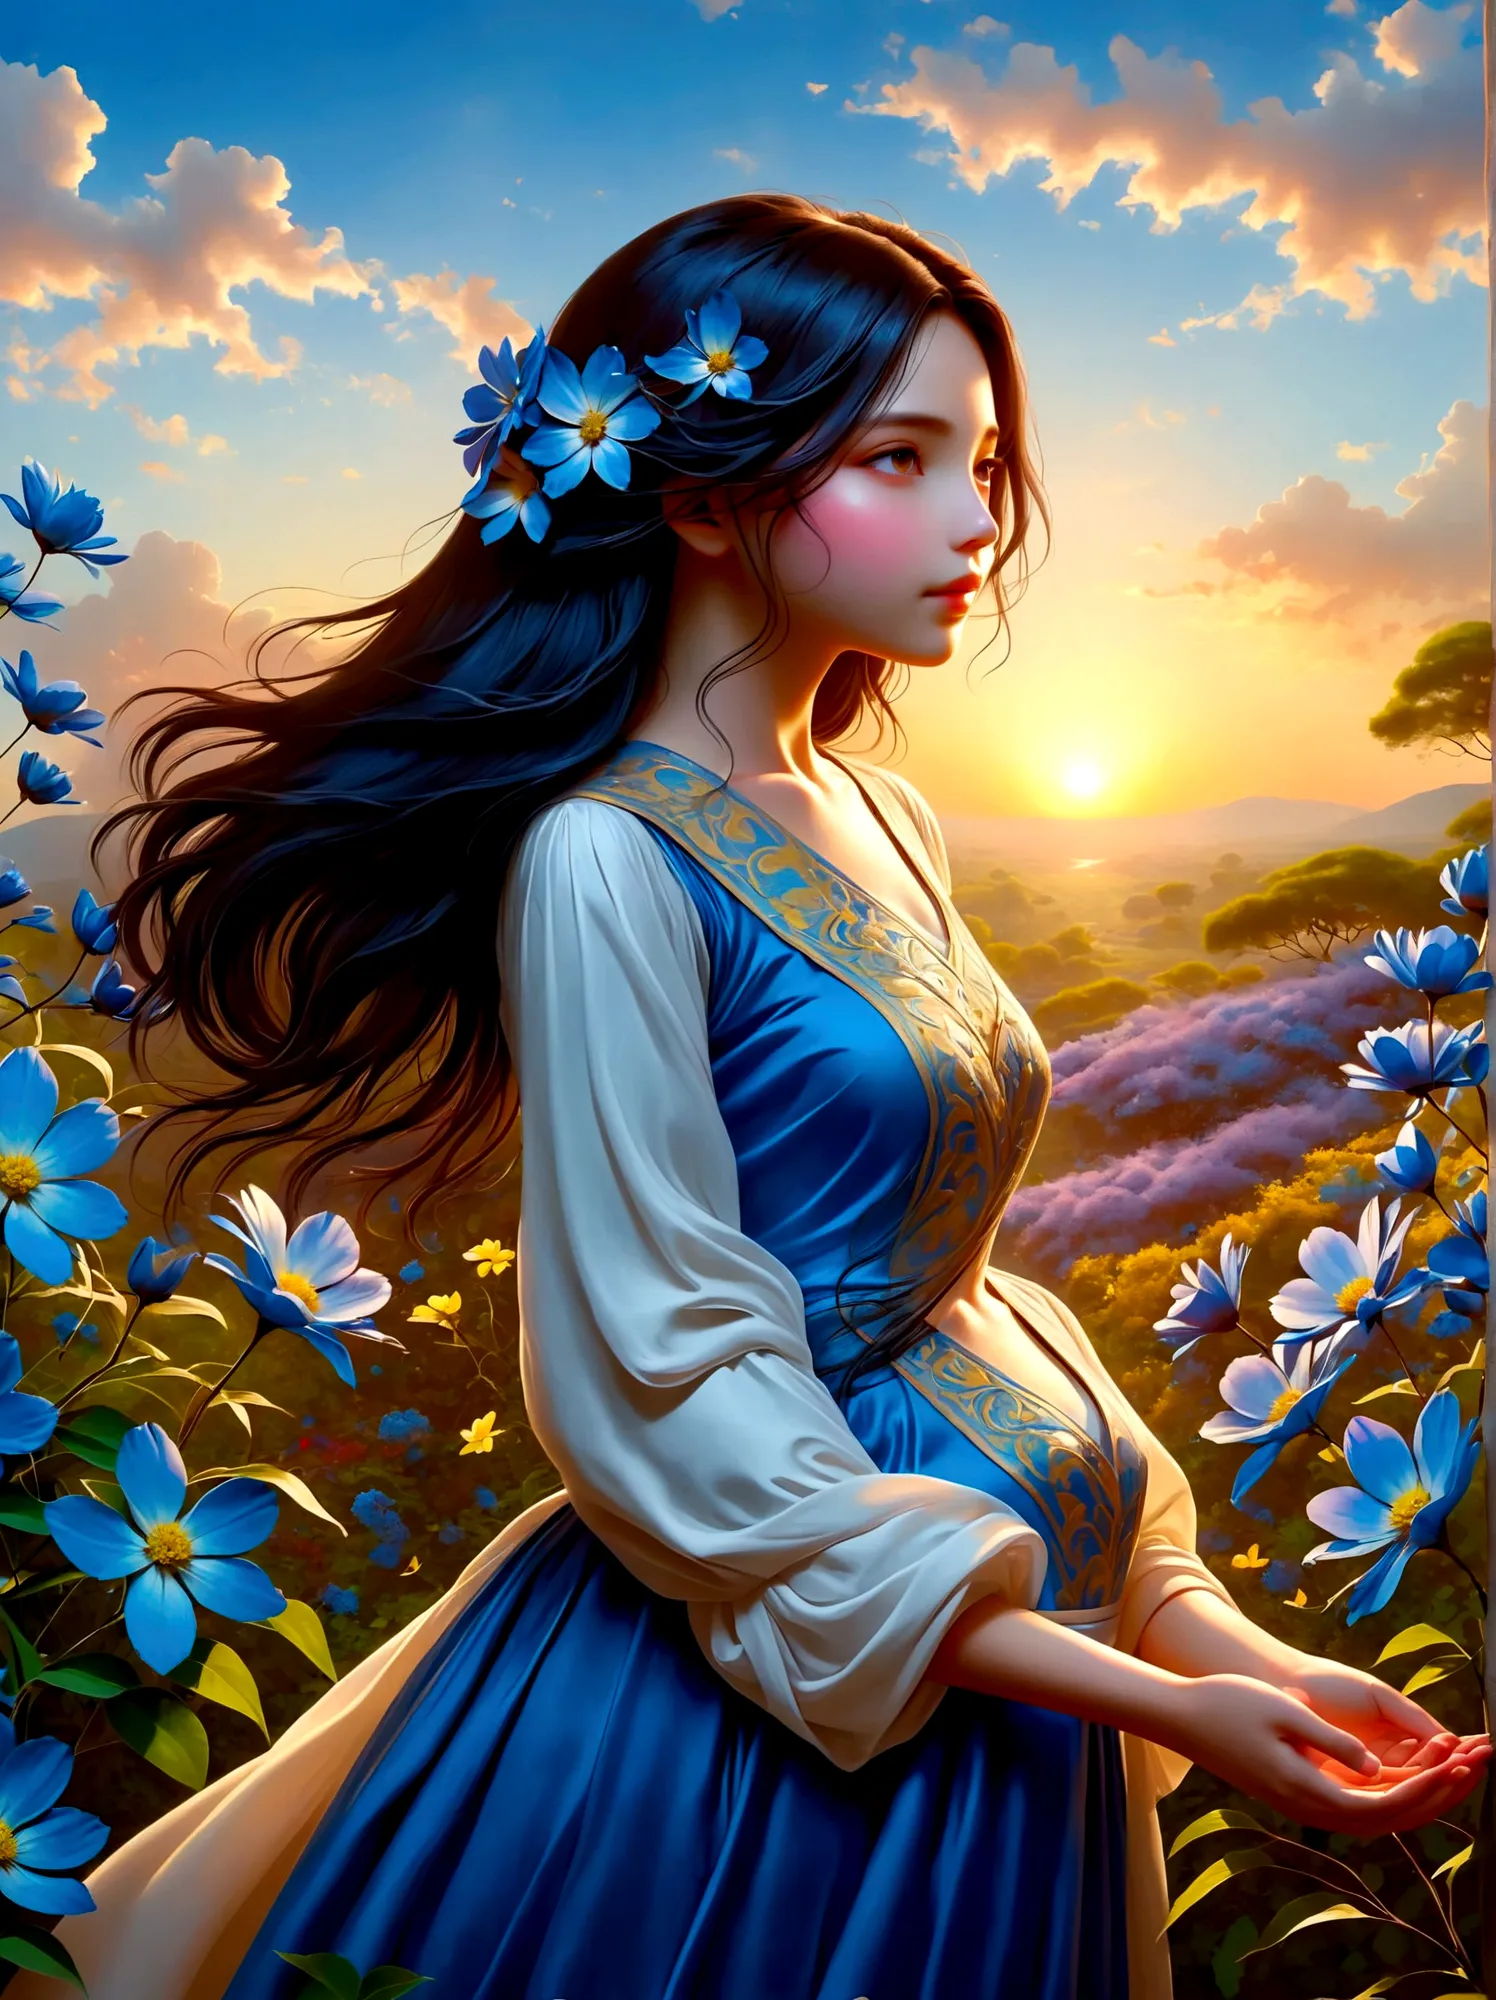 (Dawn sunrise time:1.6)，In the fragrant garden, The blind girl stood there，Open your arms, Gently touch the petals she encounter...